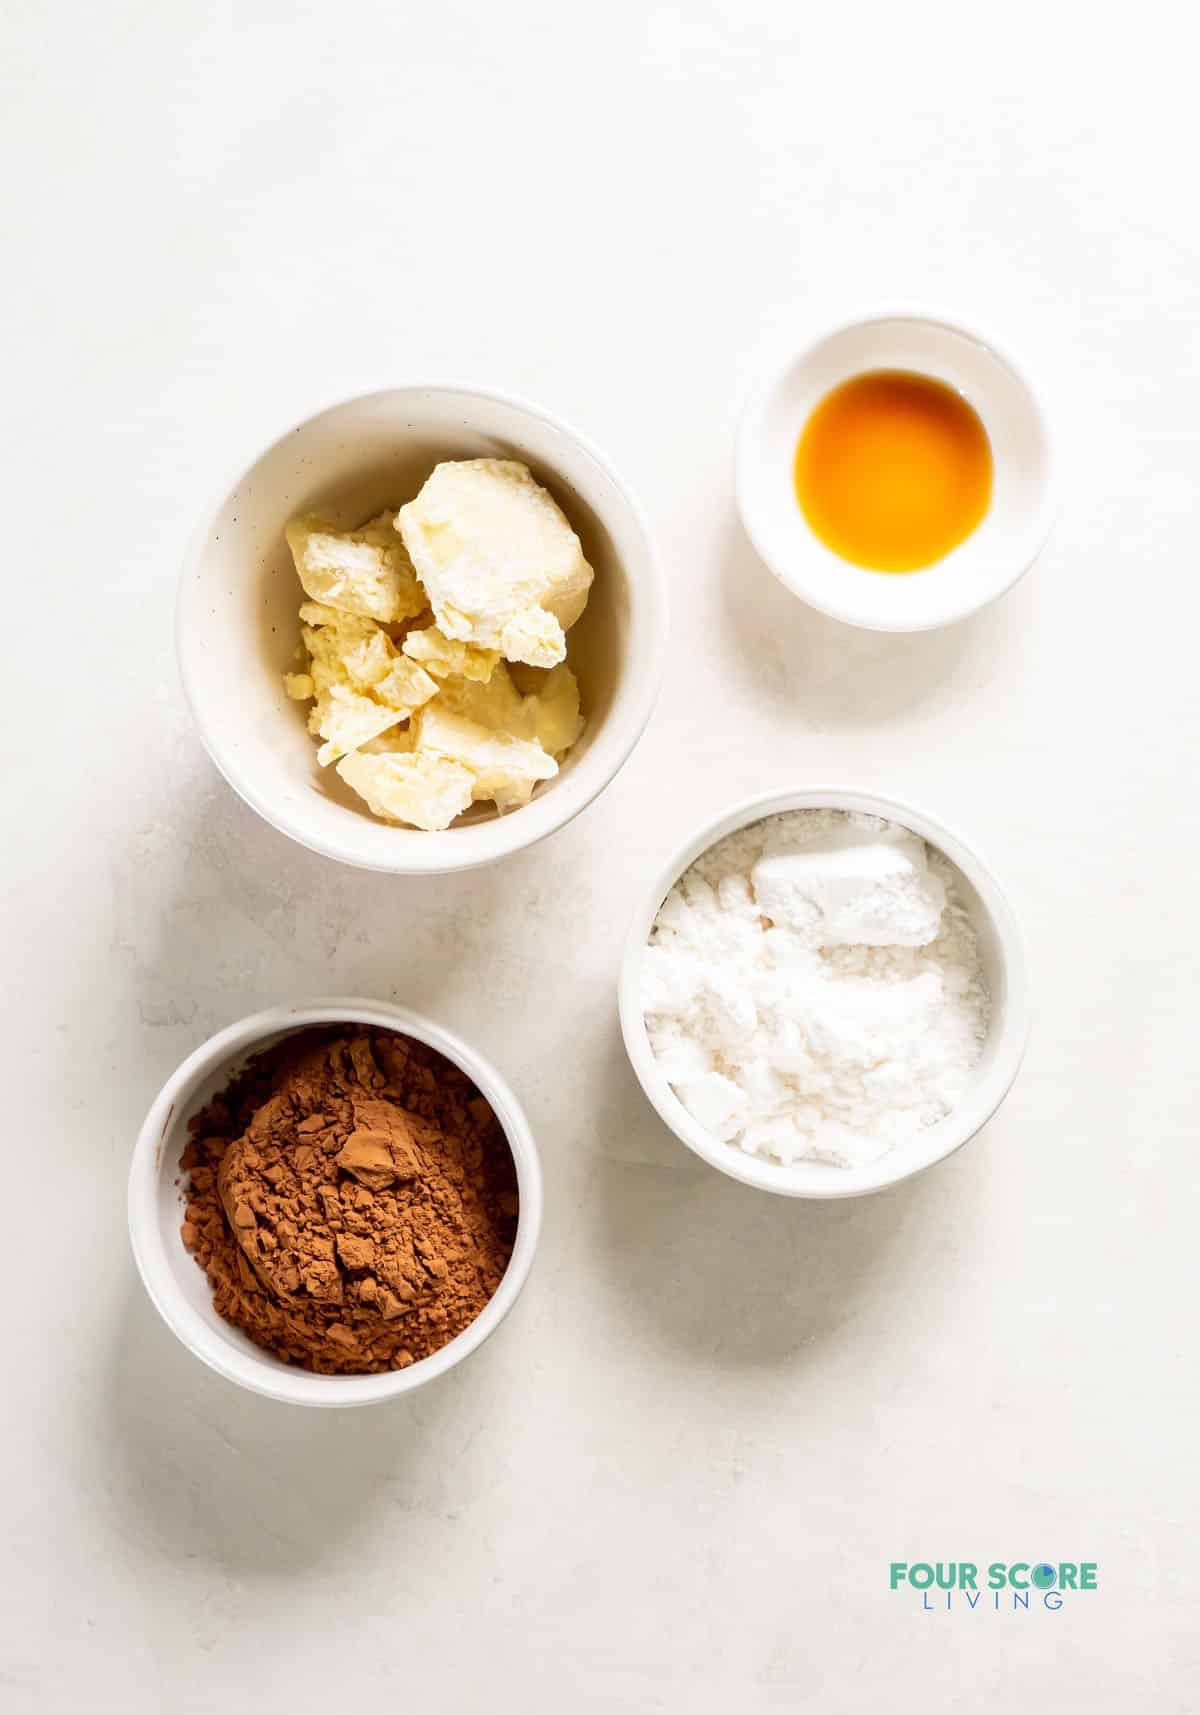 The ingredients for making keto chocolate chips, including cocoa butter, cocoa powder, vanilla, and powdered sweetener